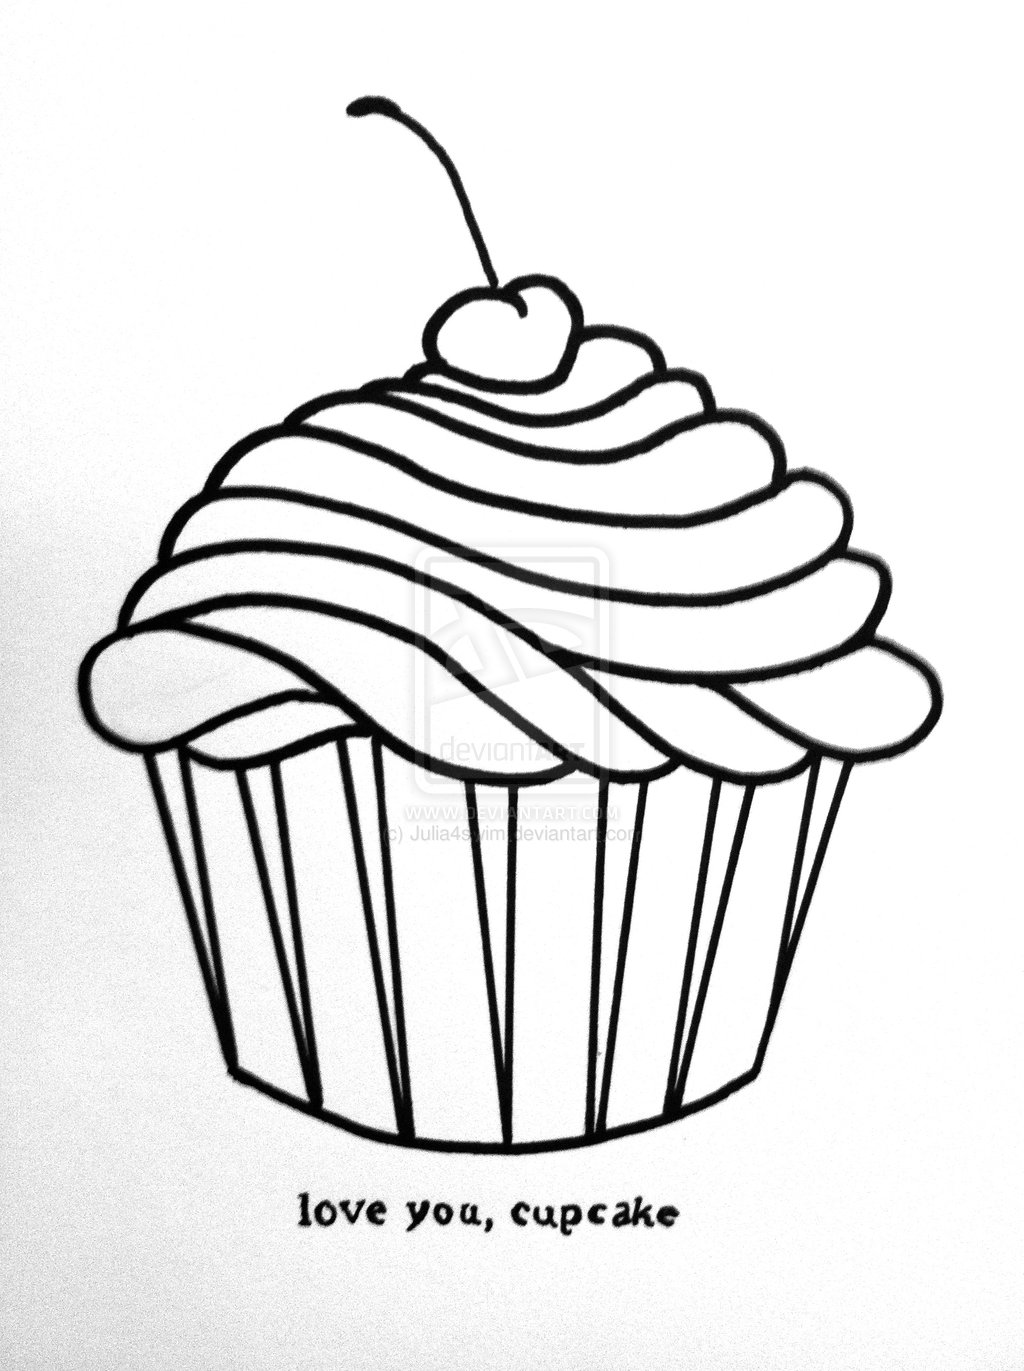 Black cup cake, Cupcake Birthday cake Muffin Drawing, Cupcake Line Drawing,  template, white png | PNGEgg